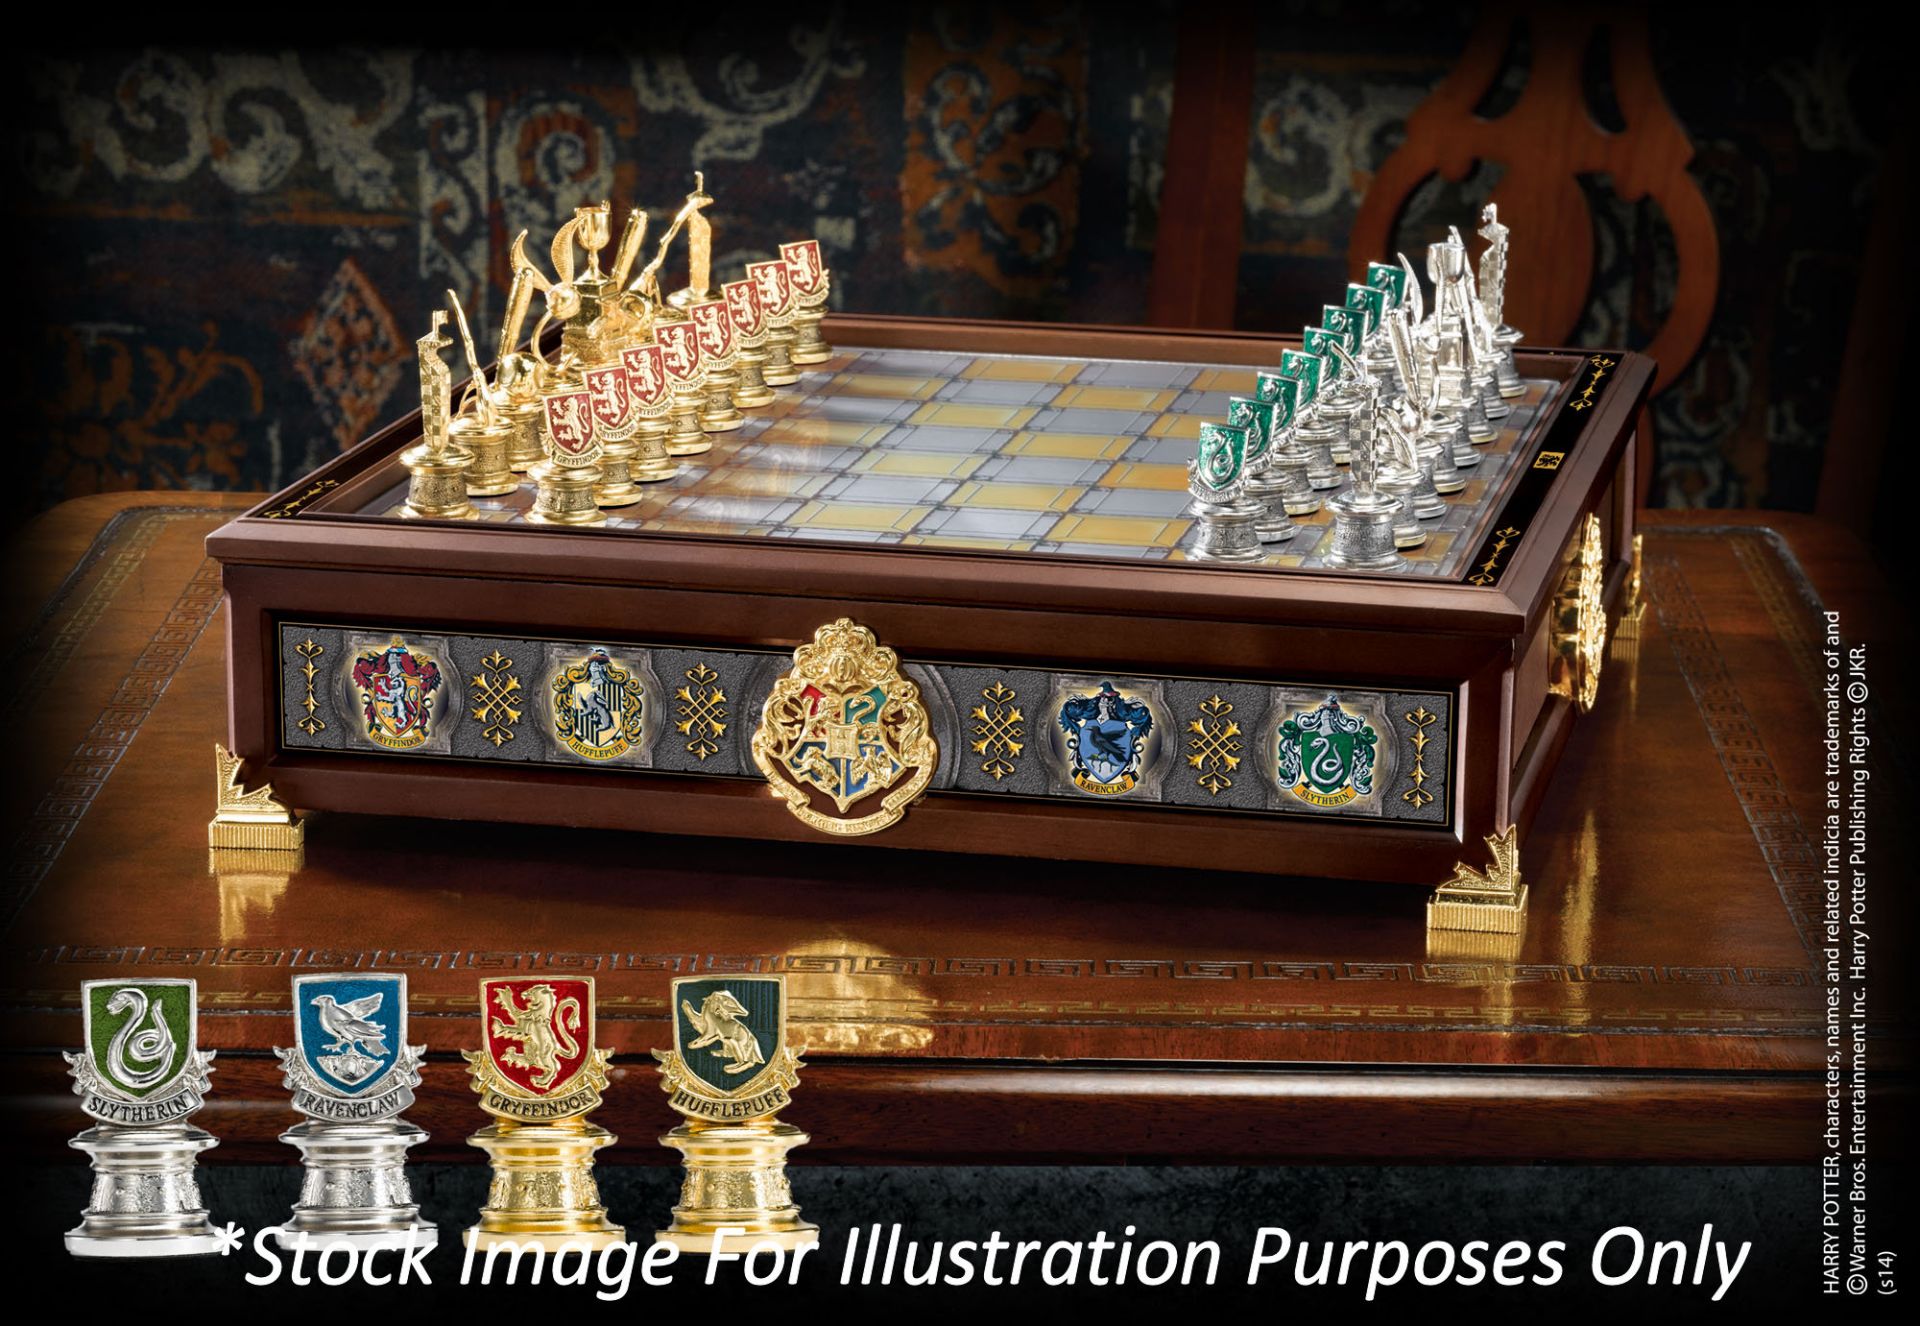 1 x Harry Potter Silver & Gold Plated Quidditch Chess Set by The Noble Collection - New/Boxed